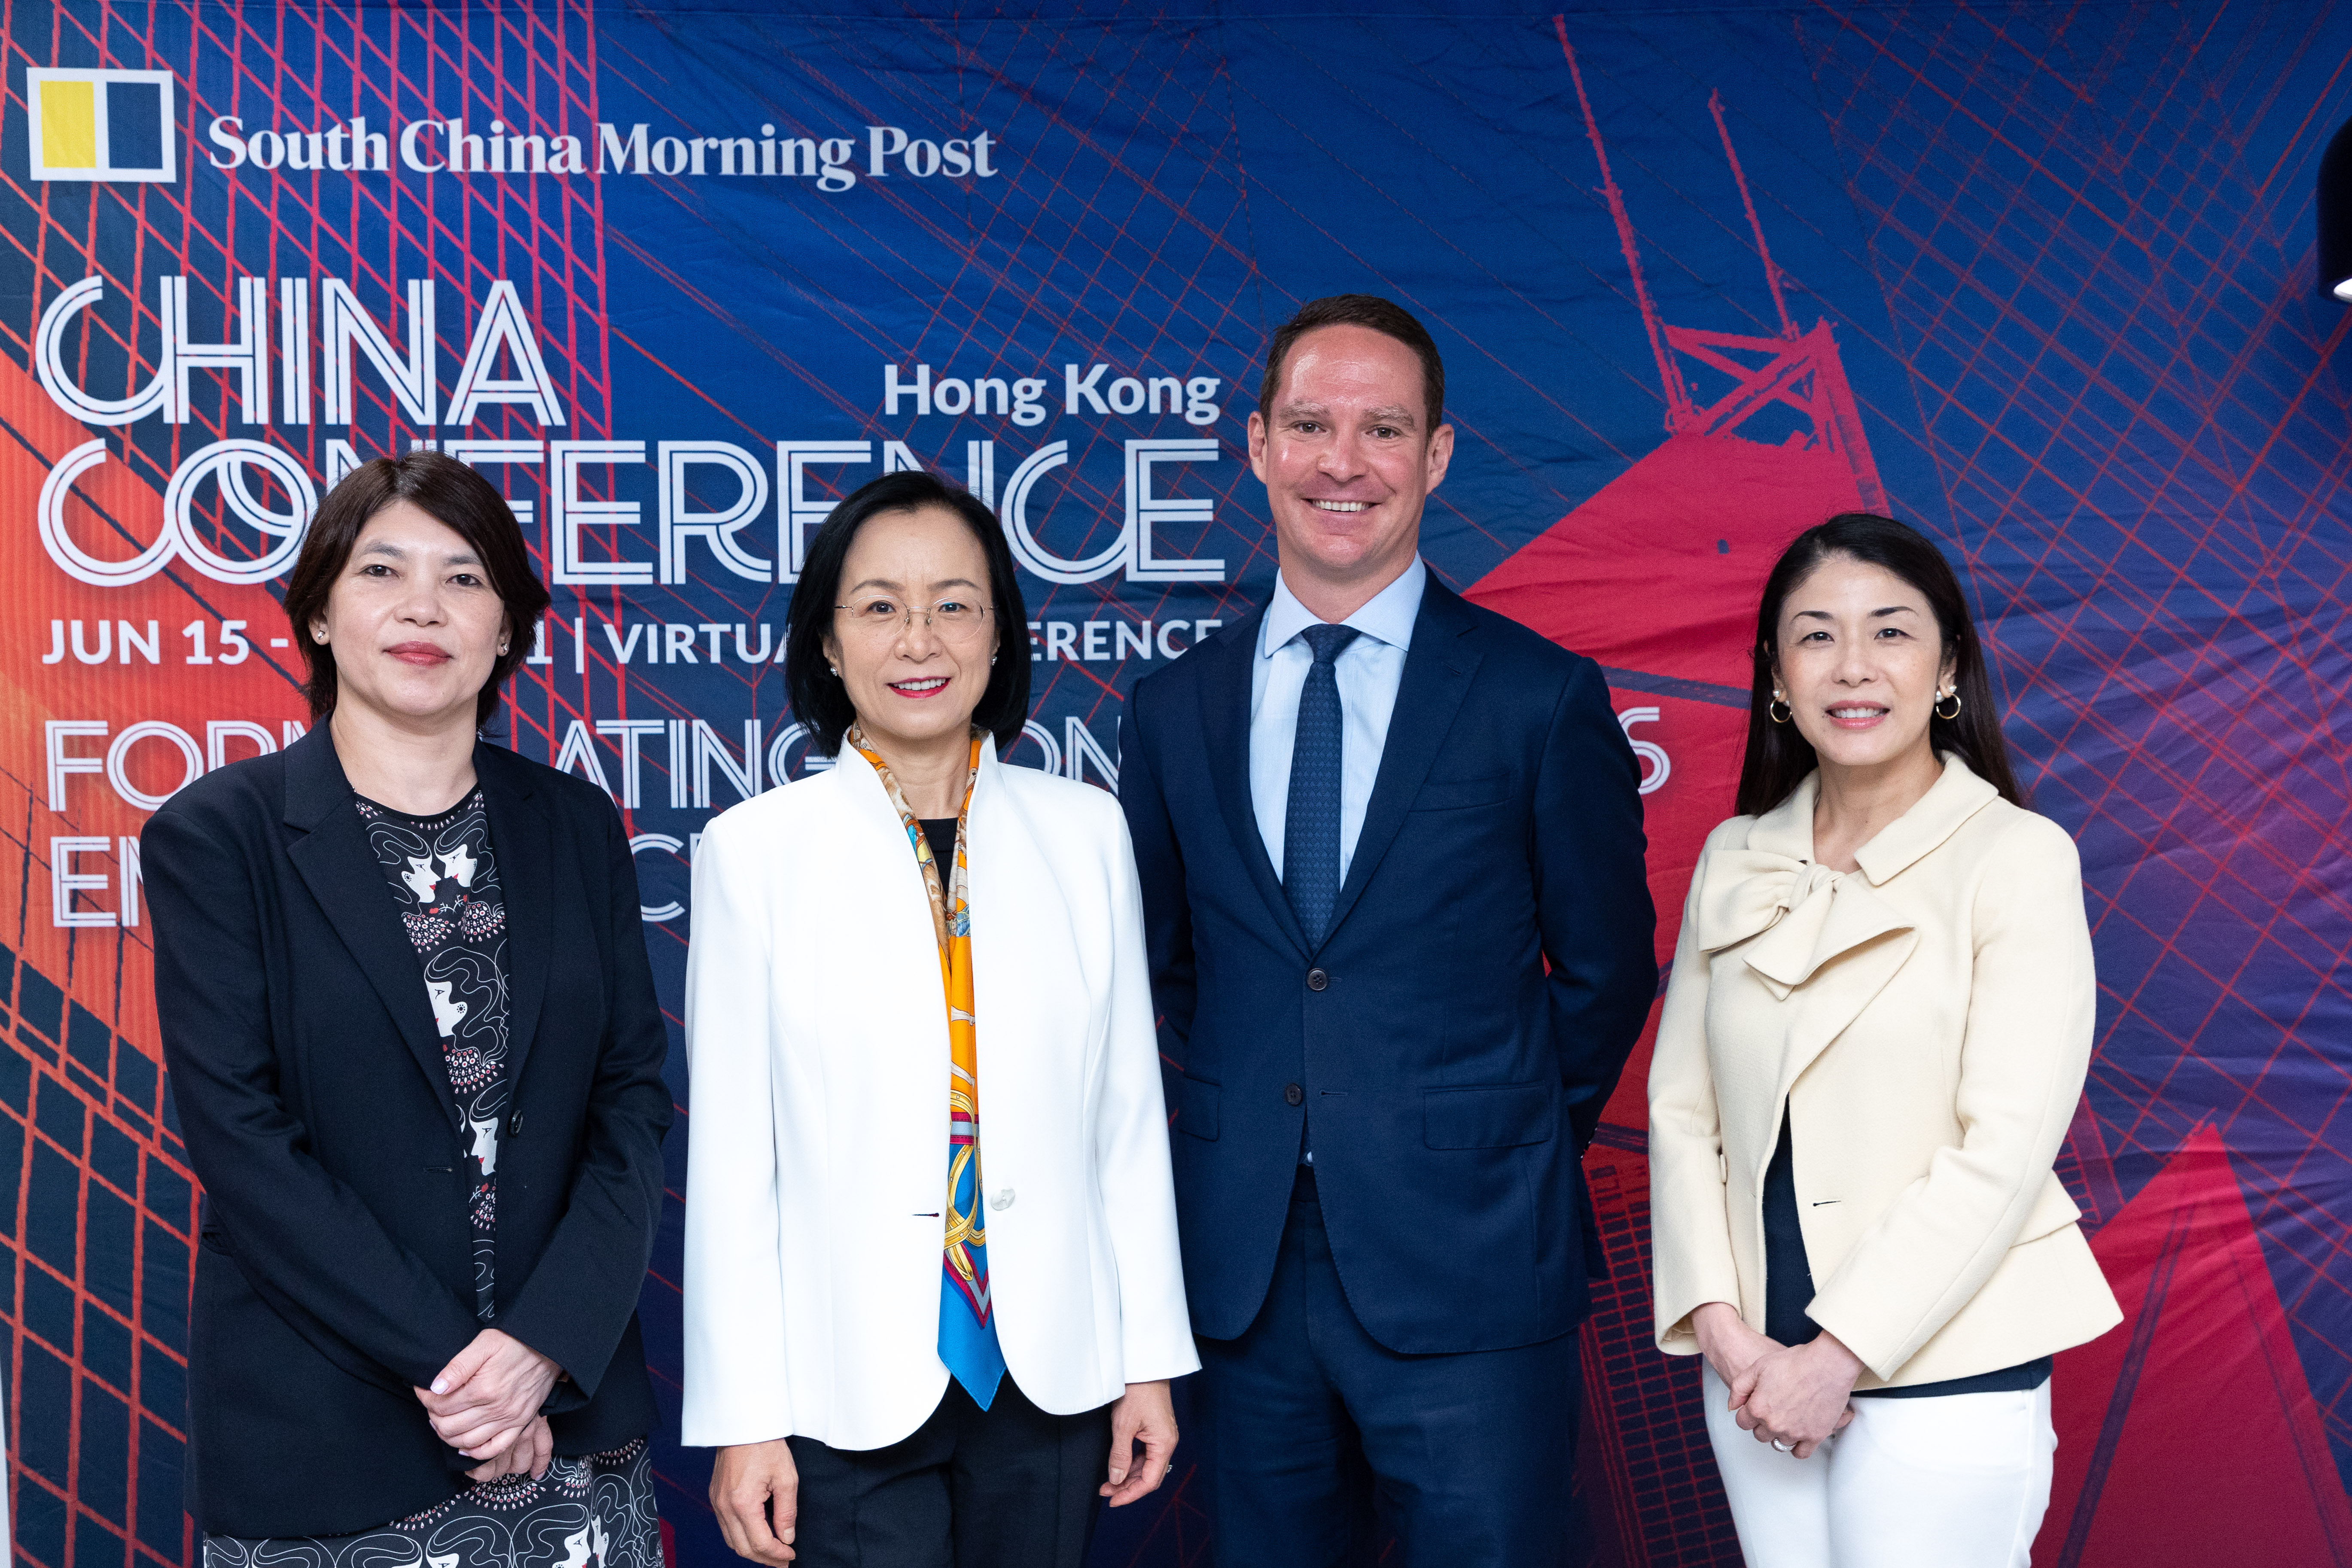 (L-R): Joanne Ho, Chief Operating Officer - Fung Academy, Fung Group; Hong Qiu, Managing Director & Chief Operating Officer, Lazard Greater China; Tom Gaffney, Regional Managing Director, CBRE Hong Kong; and Cynthia Chung, Partner, Deacons. Photo by: Alex Ma